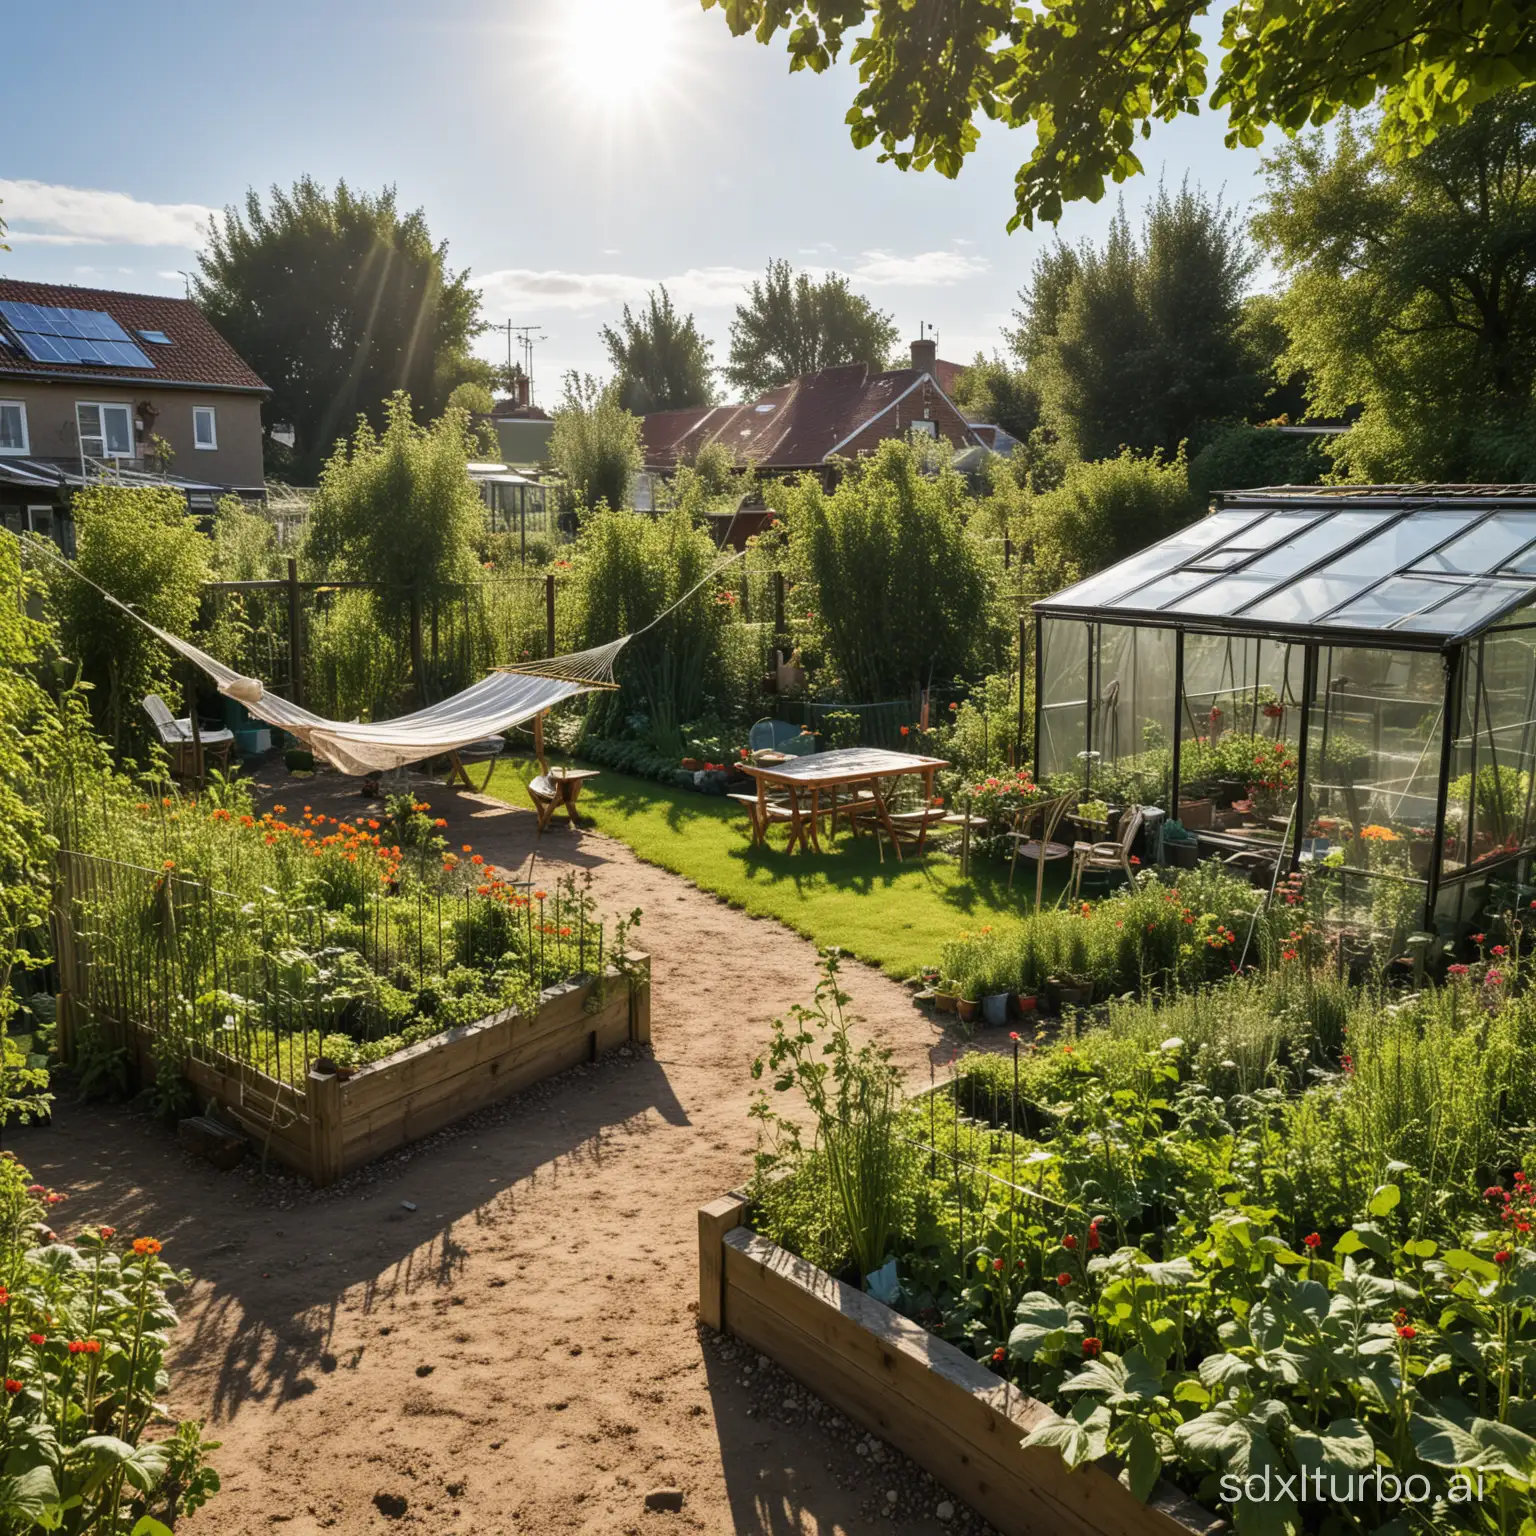 garden plot with a vegetable garden and a barbecue, hammock, greenhouse, all this under the bright sun